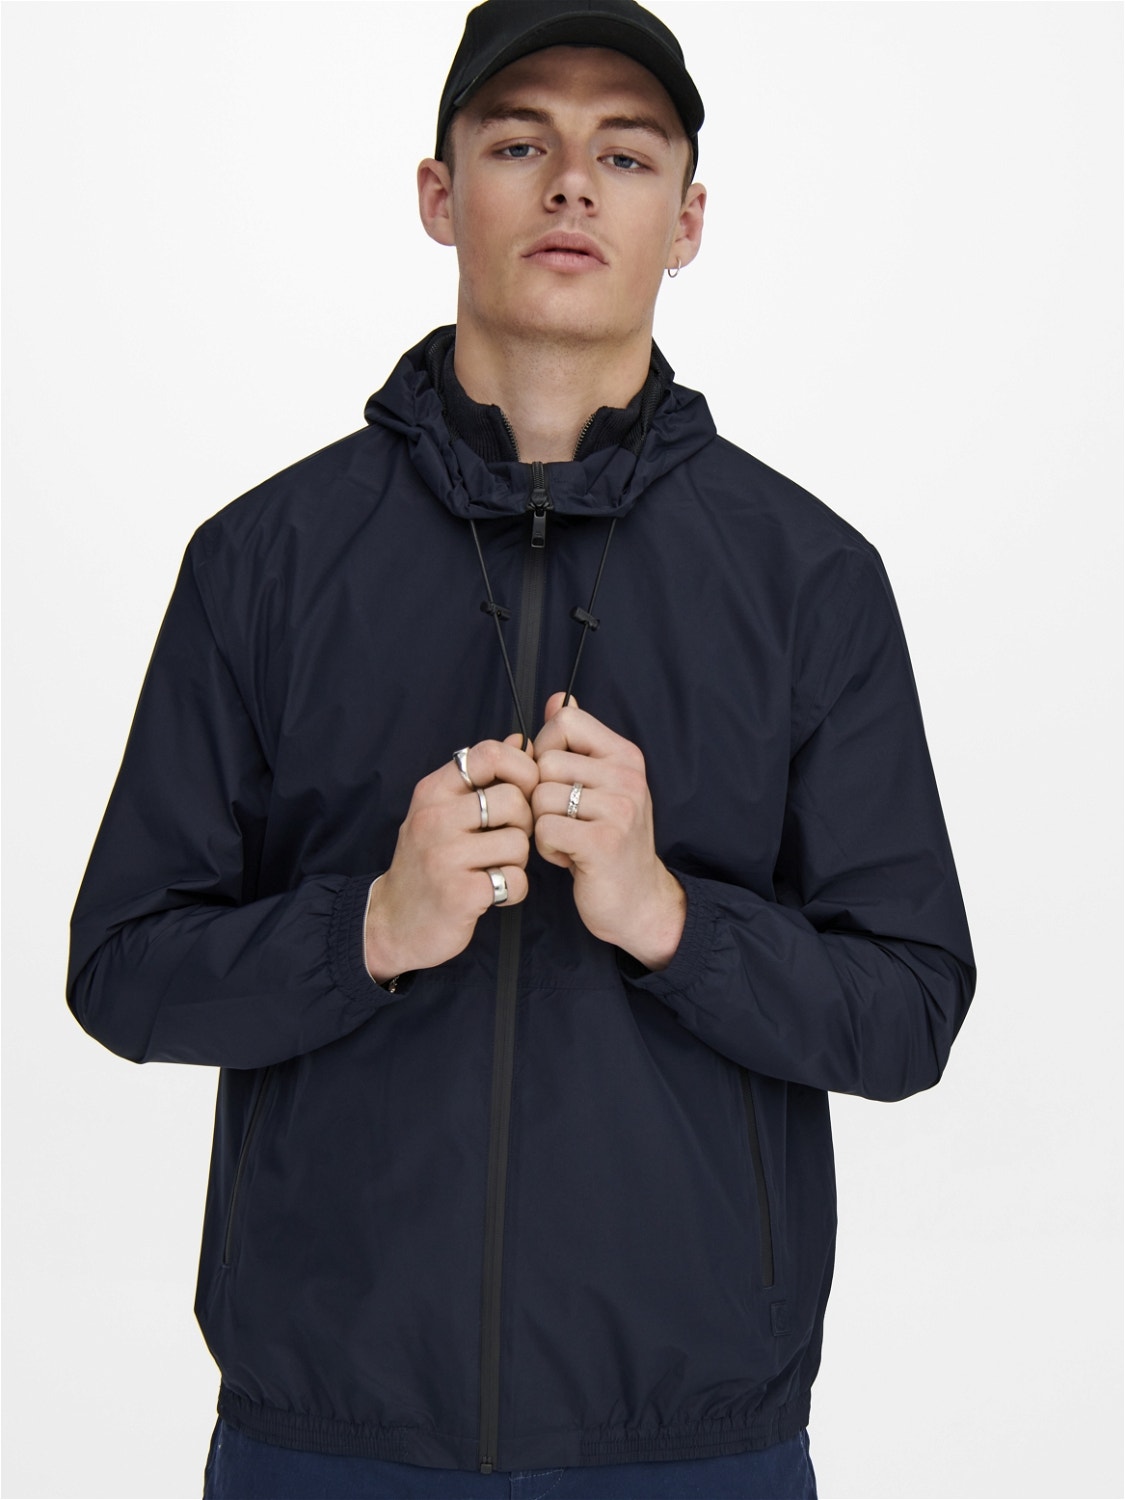 ONLY & SONS Hood with string regulation Elasticated cuffs Jacket -Dark Navy - 22021518